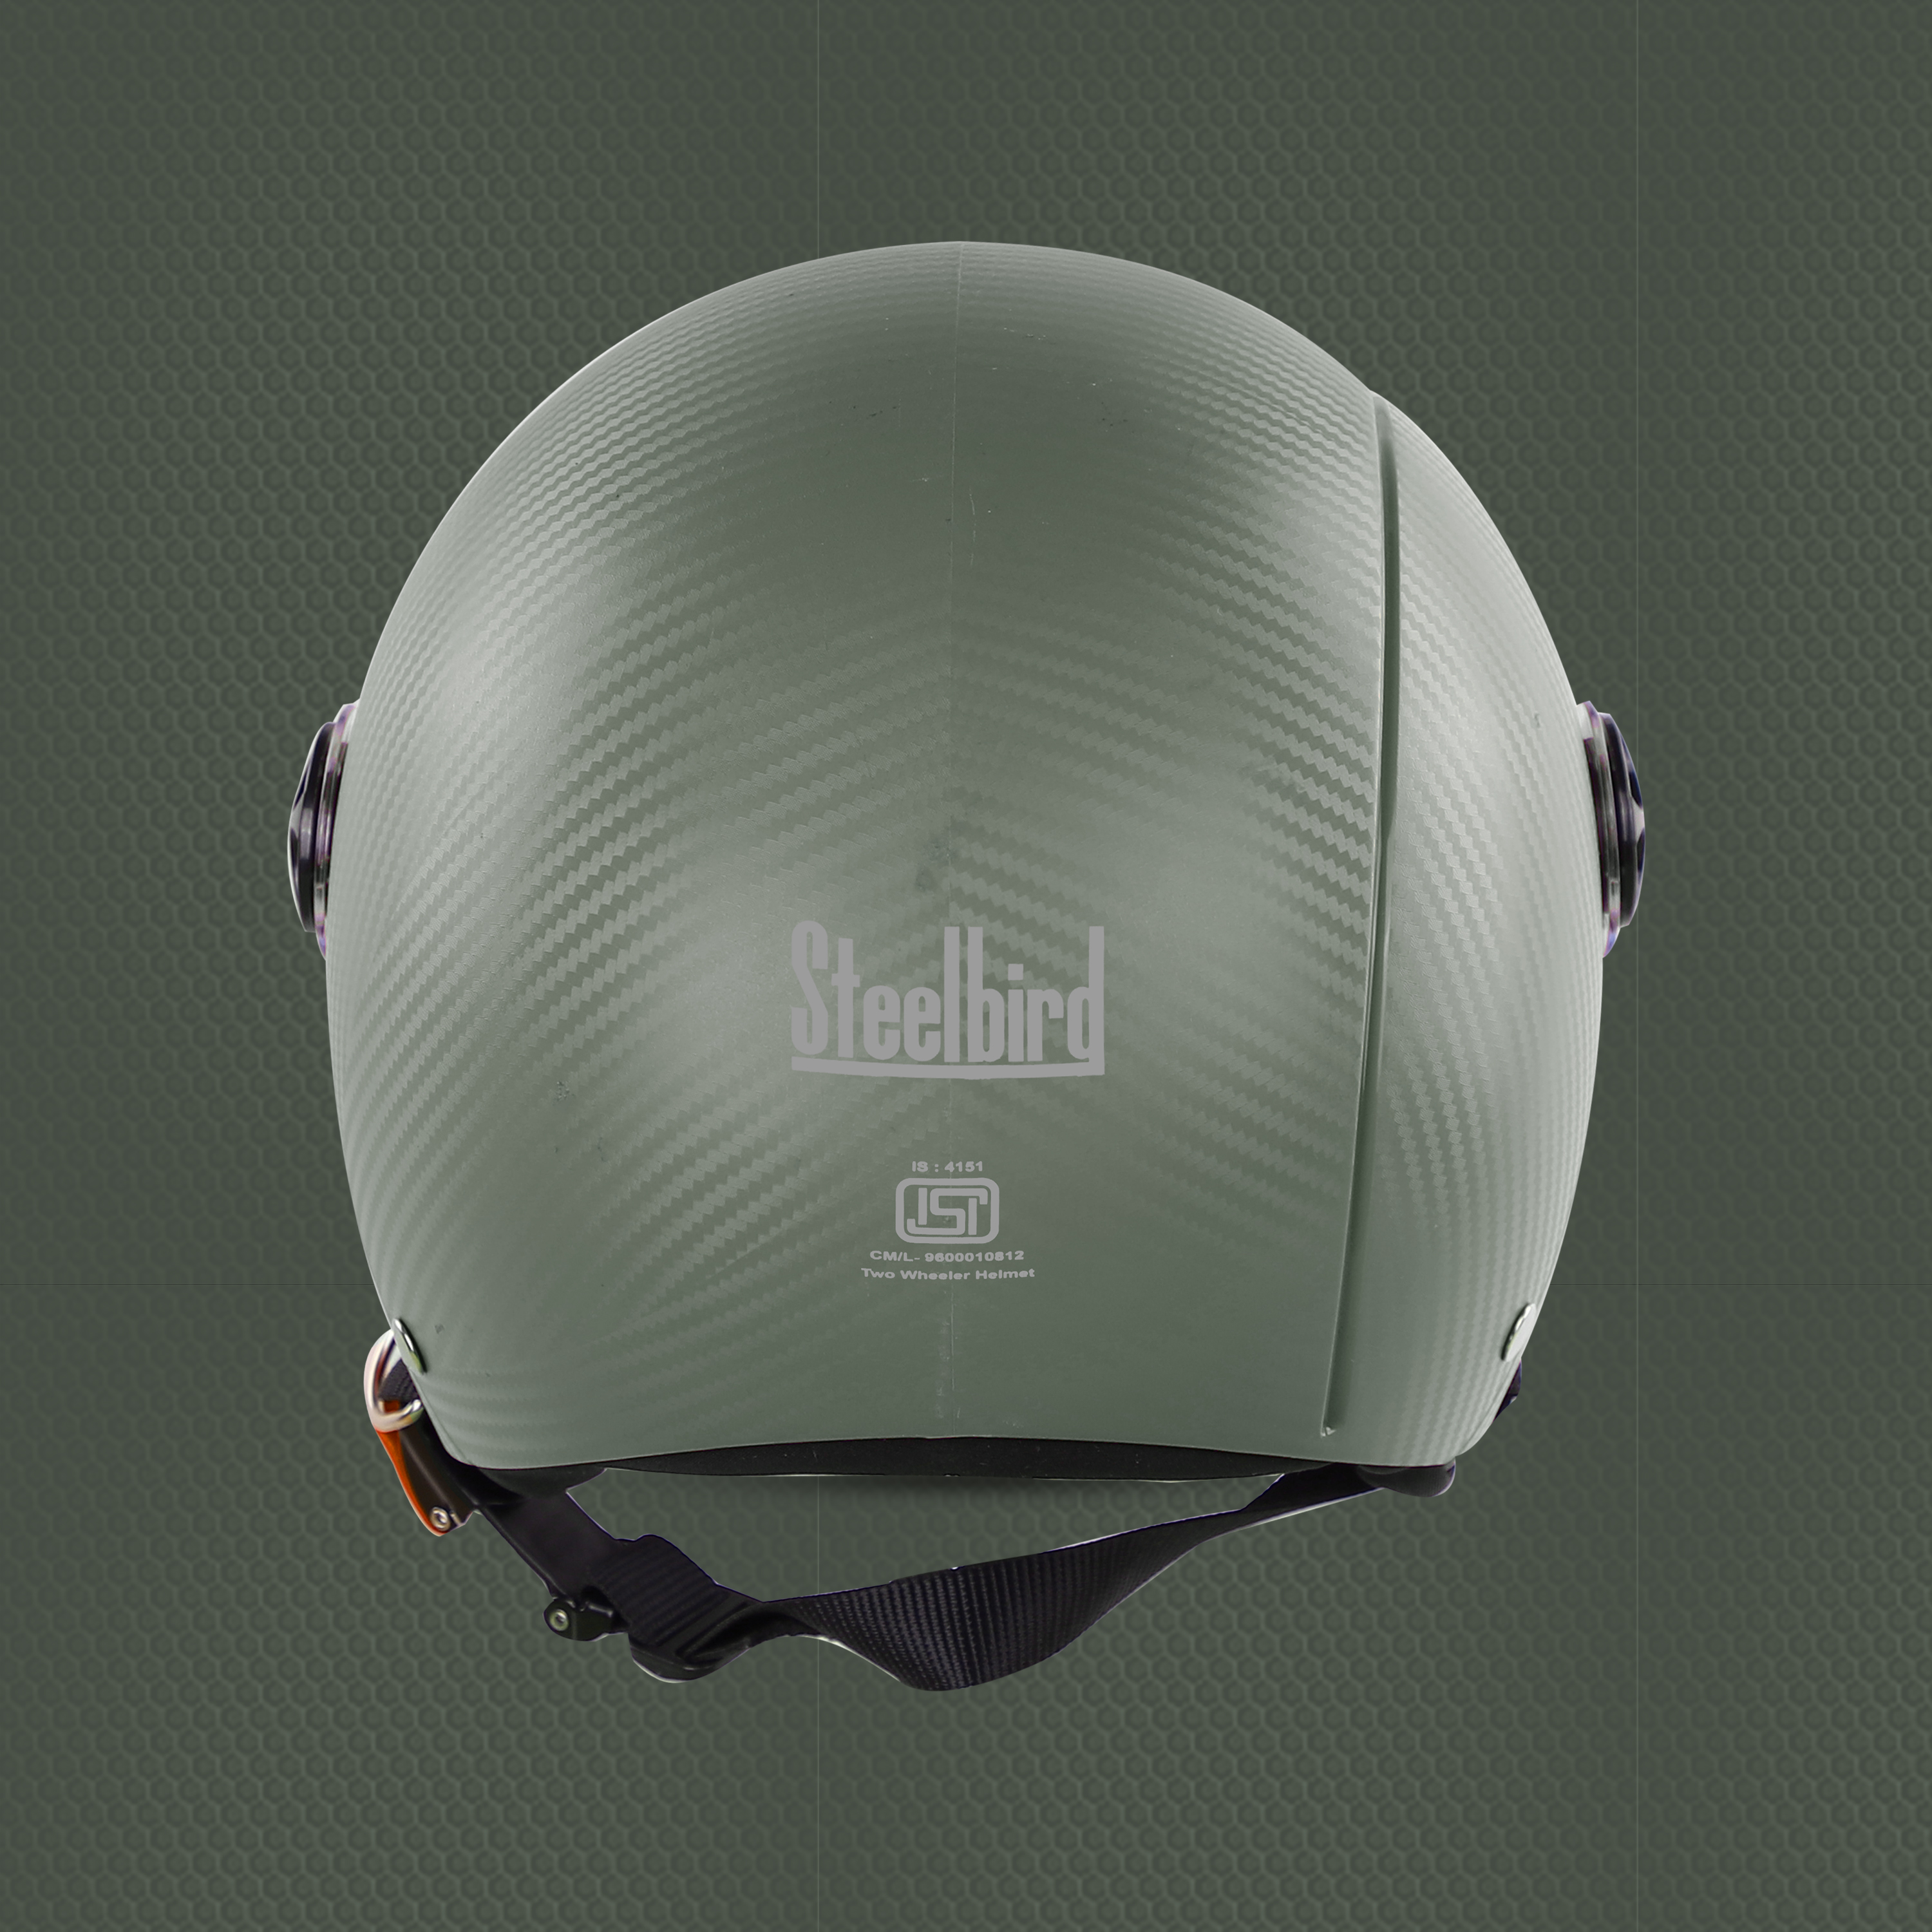 Steelbird SBH-16 Ruby ISI Certified Open Face Helmet (Dashing Battle Green With Clear Visor)